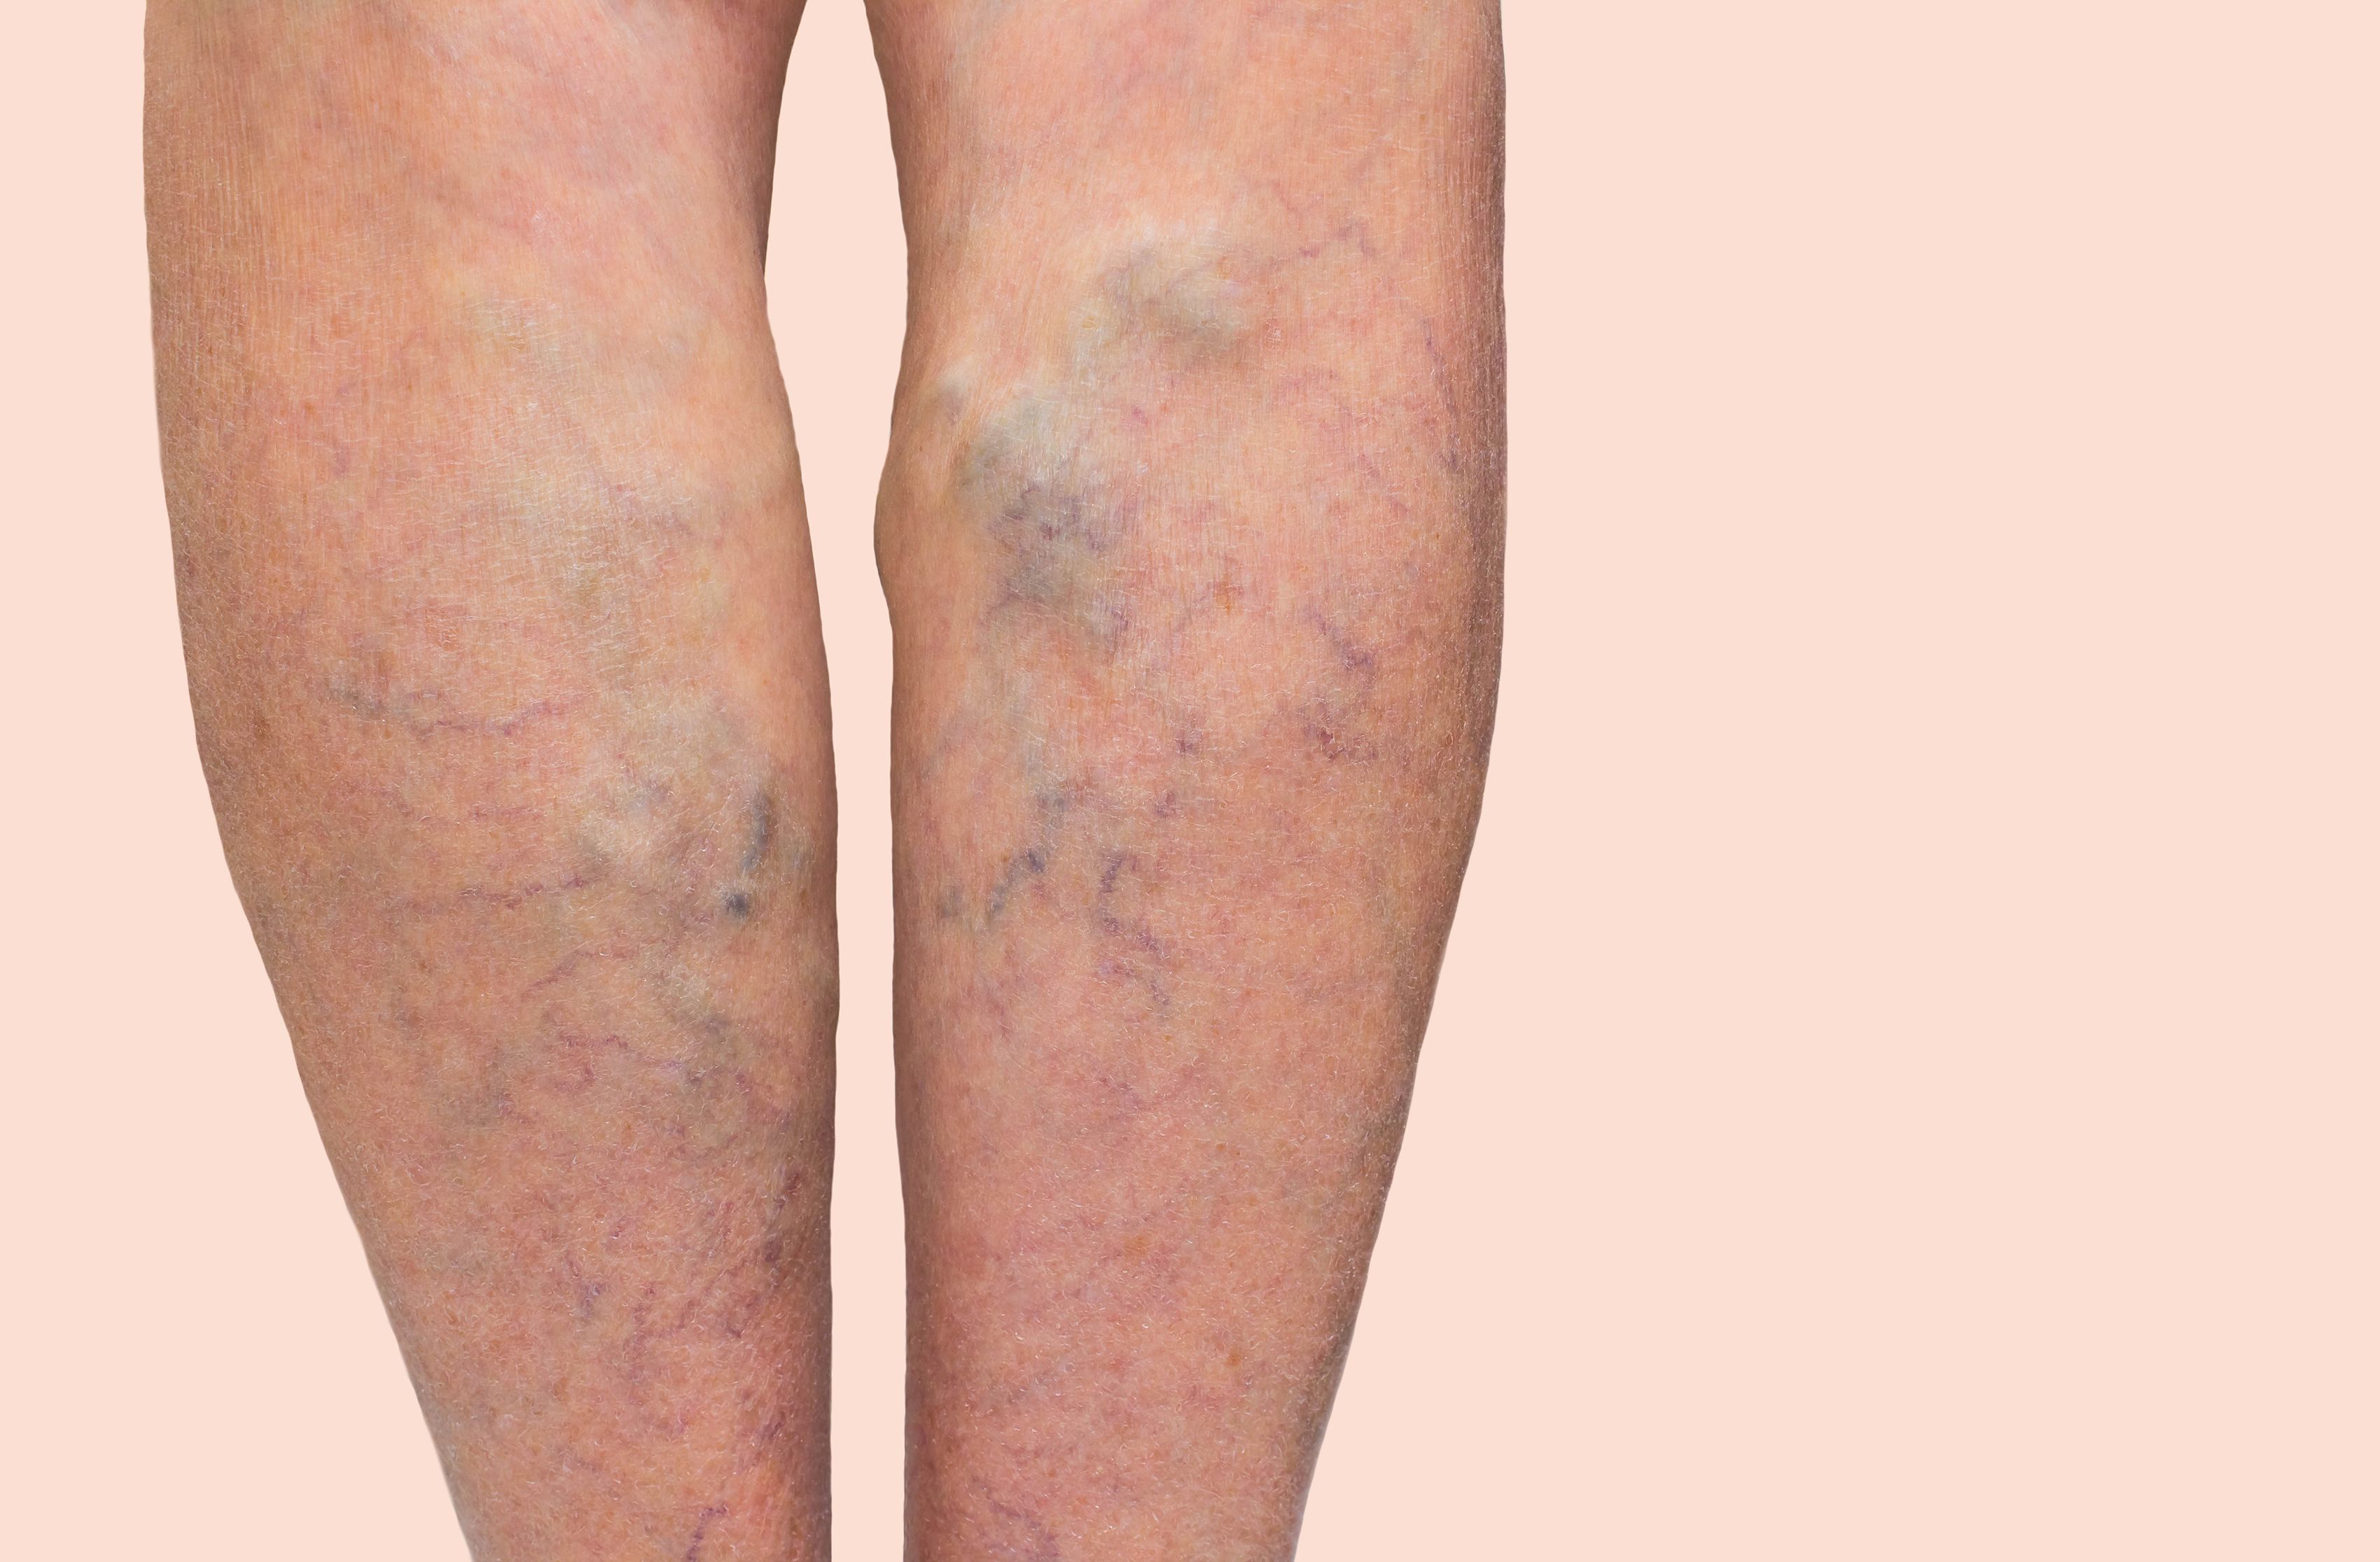 Why Are Women More Susceptible to Varicose Veins?